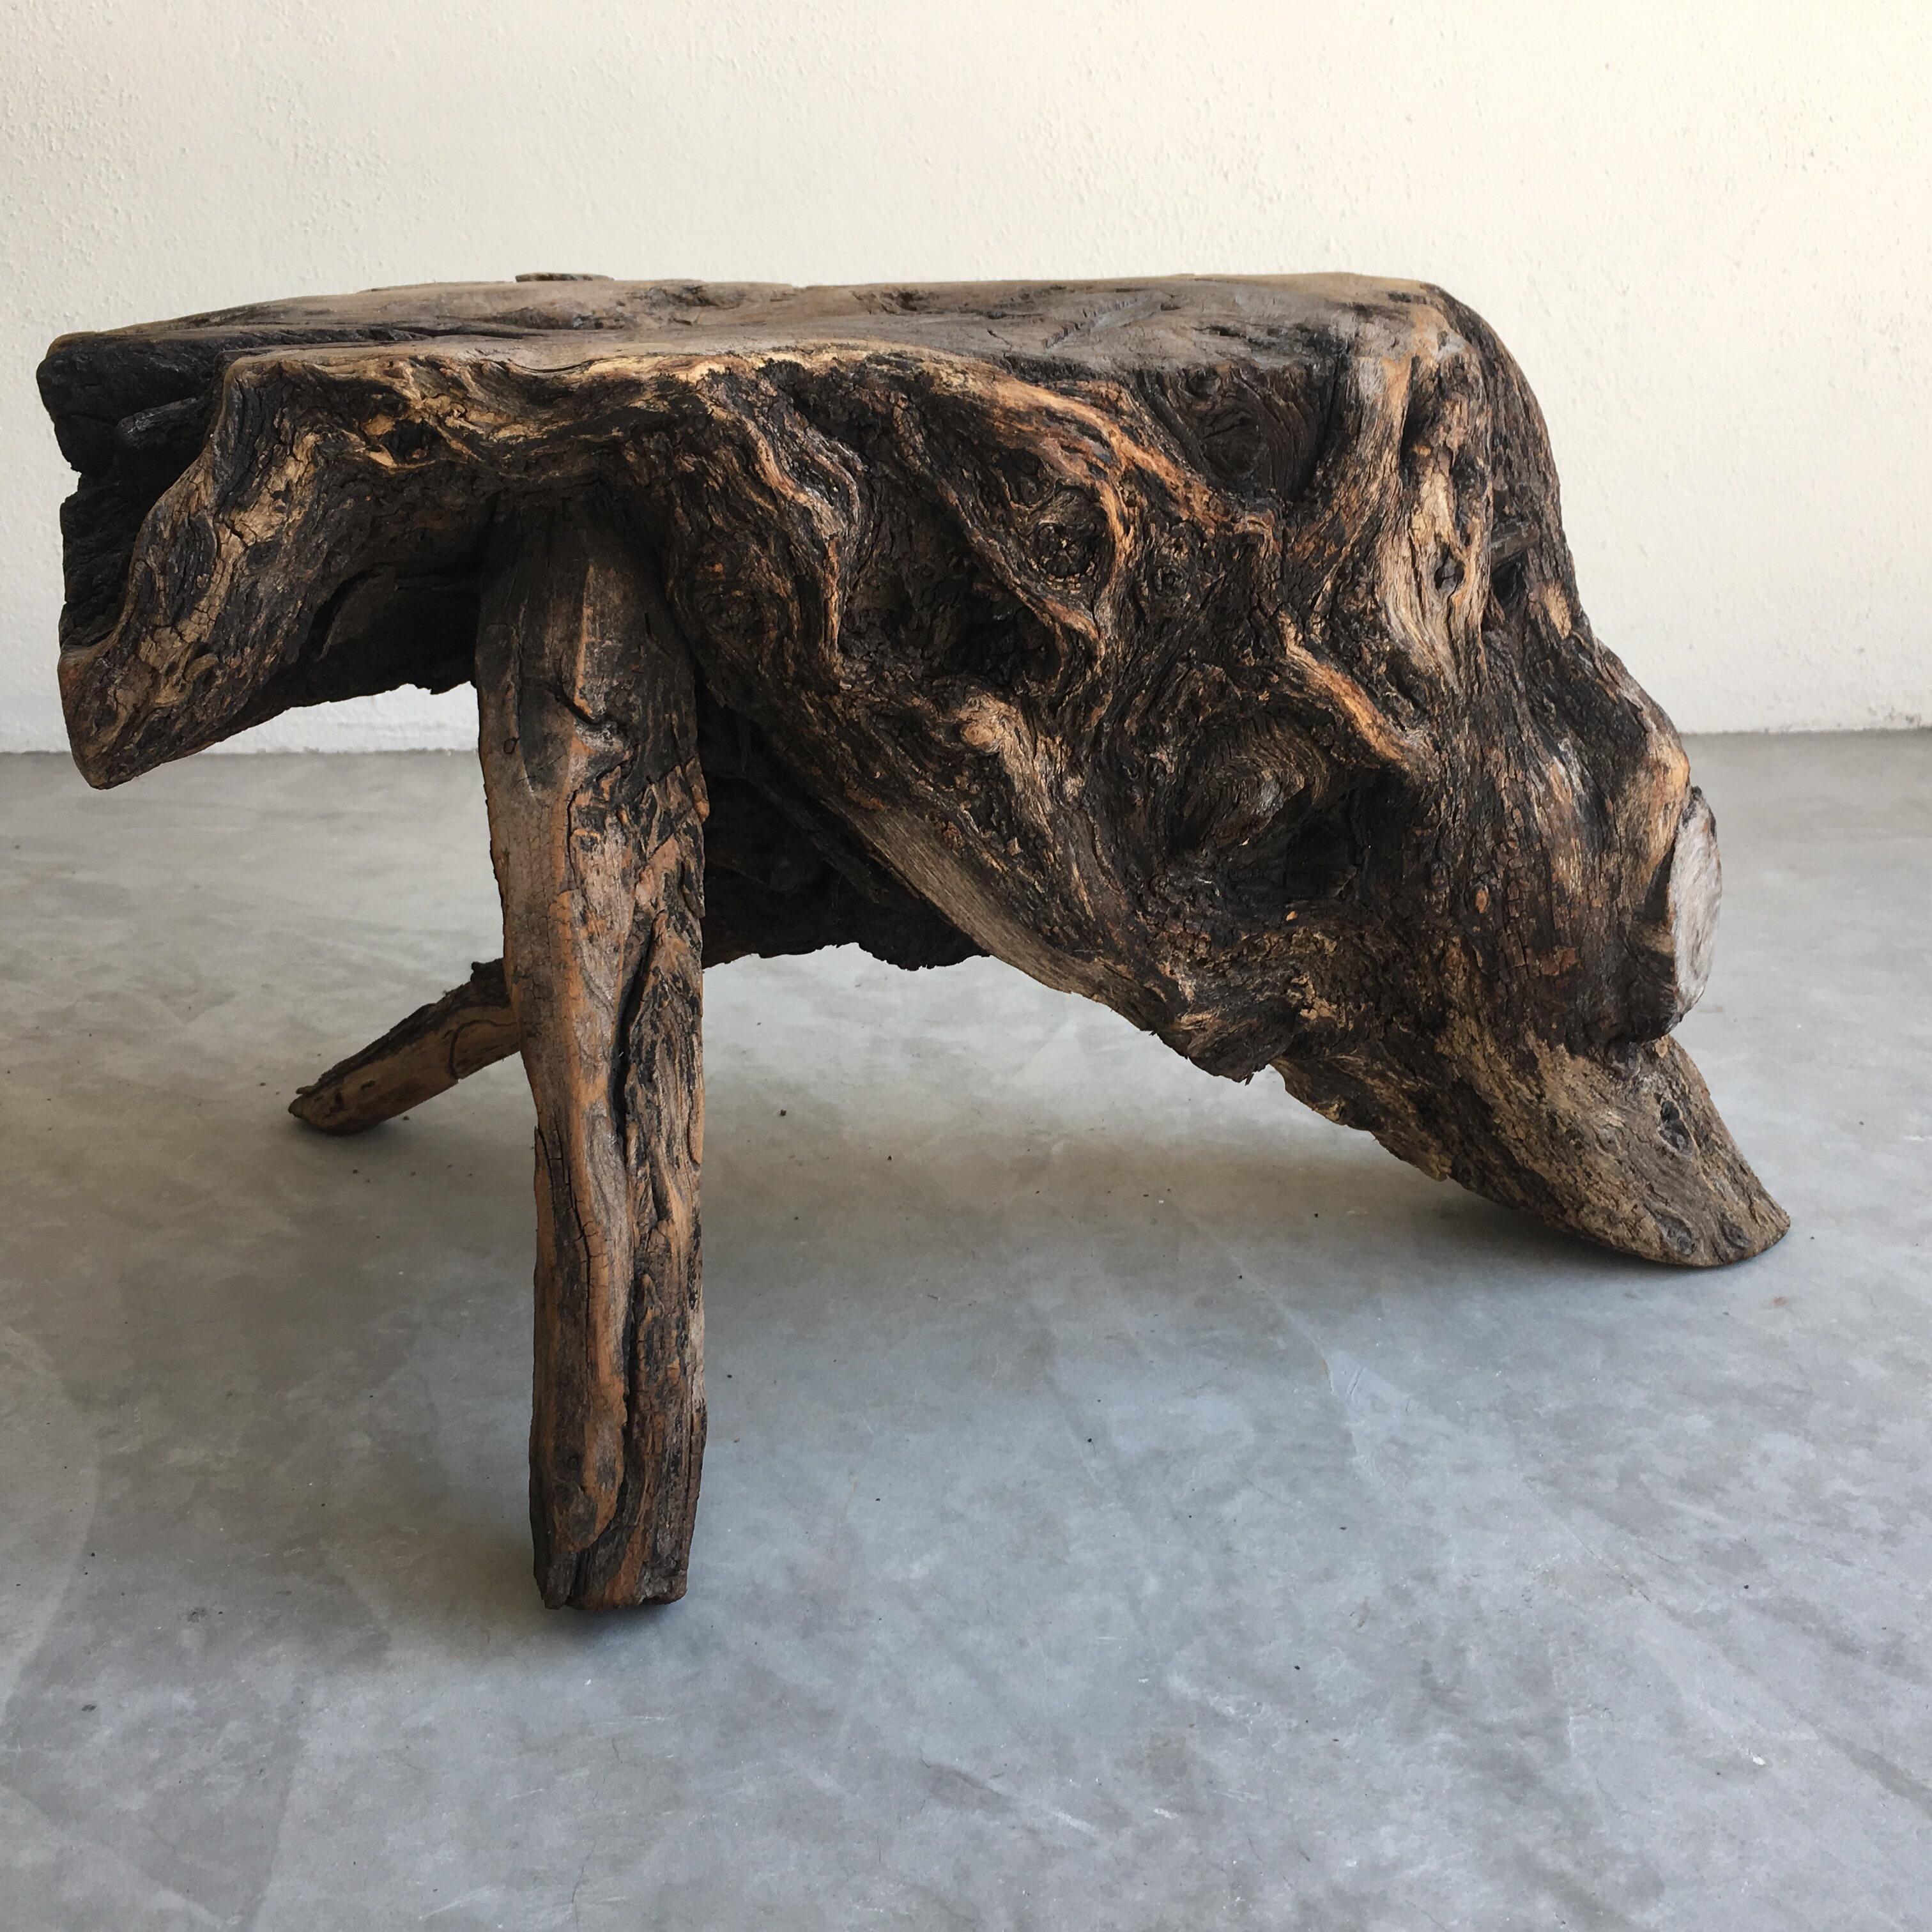 Hand carved Primitive styled mesquite hardwood stool from the Sierra Gorda region of Guanajuato, Mexico. This is a one of a kind piece.